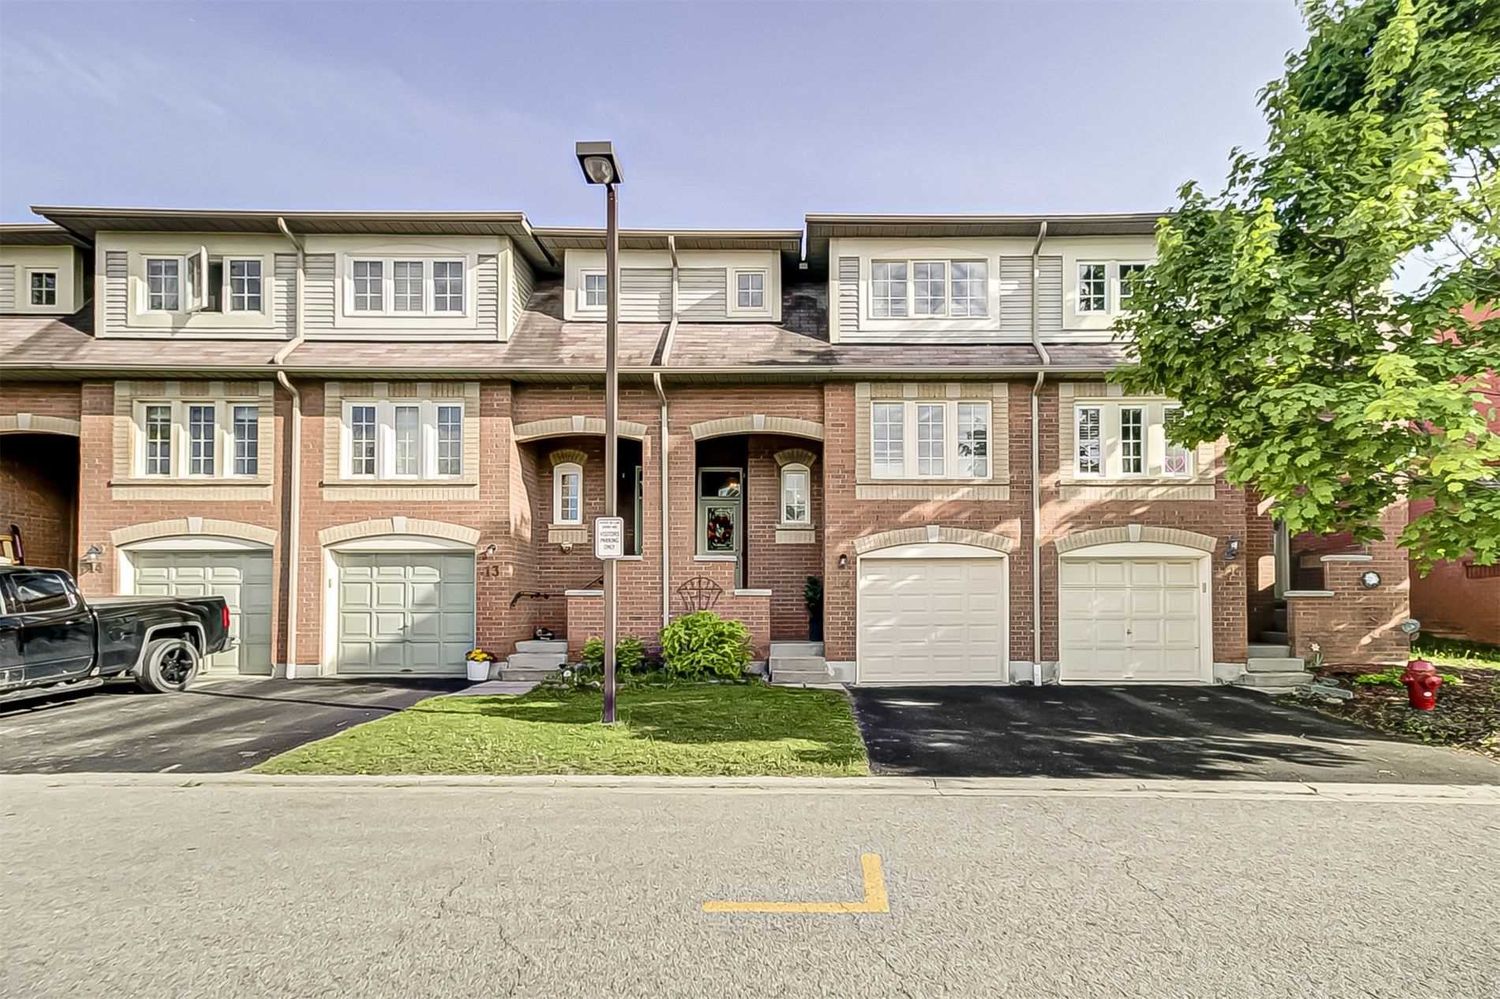 1801 Nichol Avenue. 1801 Nichol Avenue Townhomes is located in  Whitby, Toronto - image #1 of 2